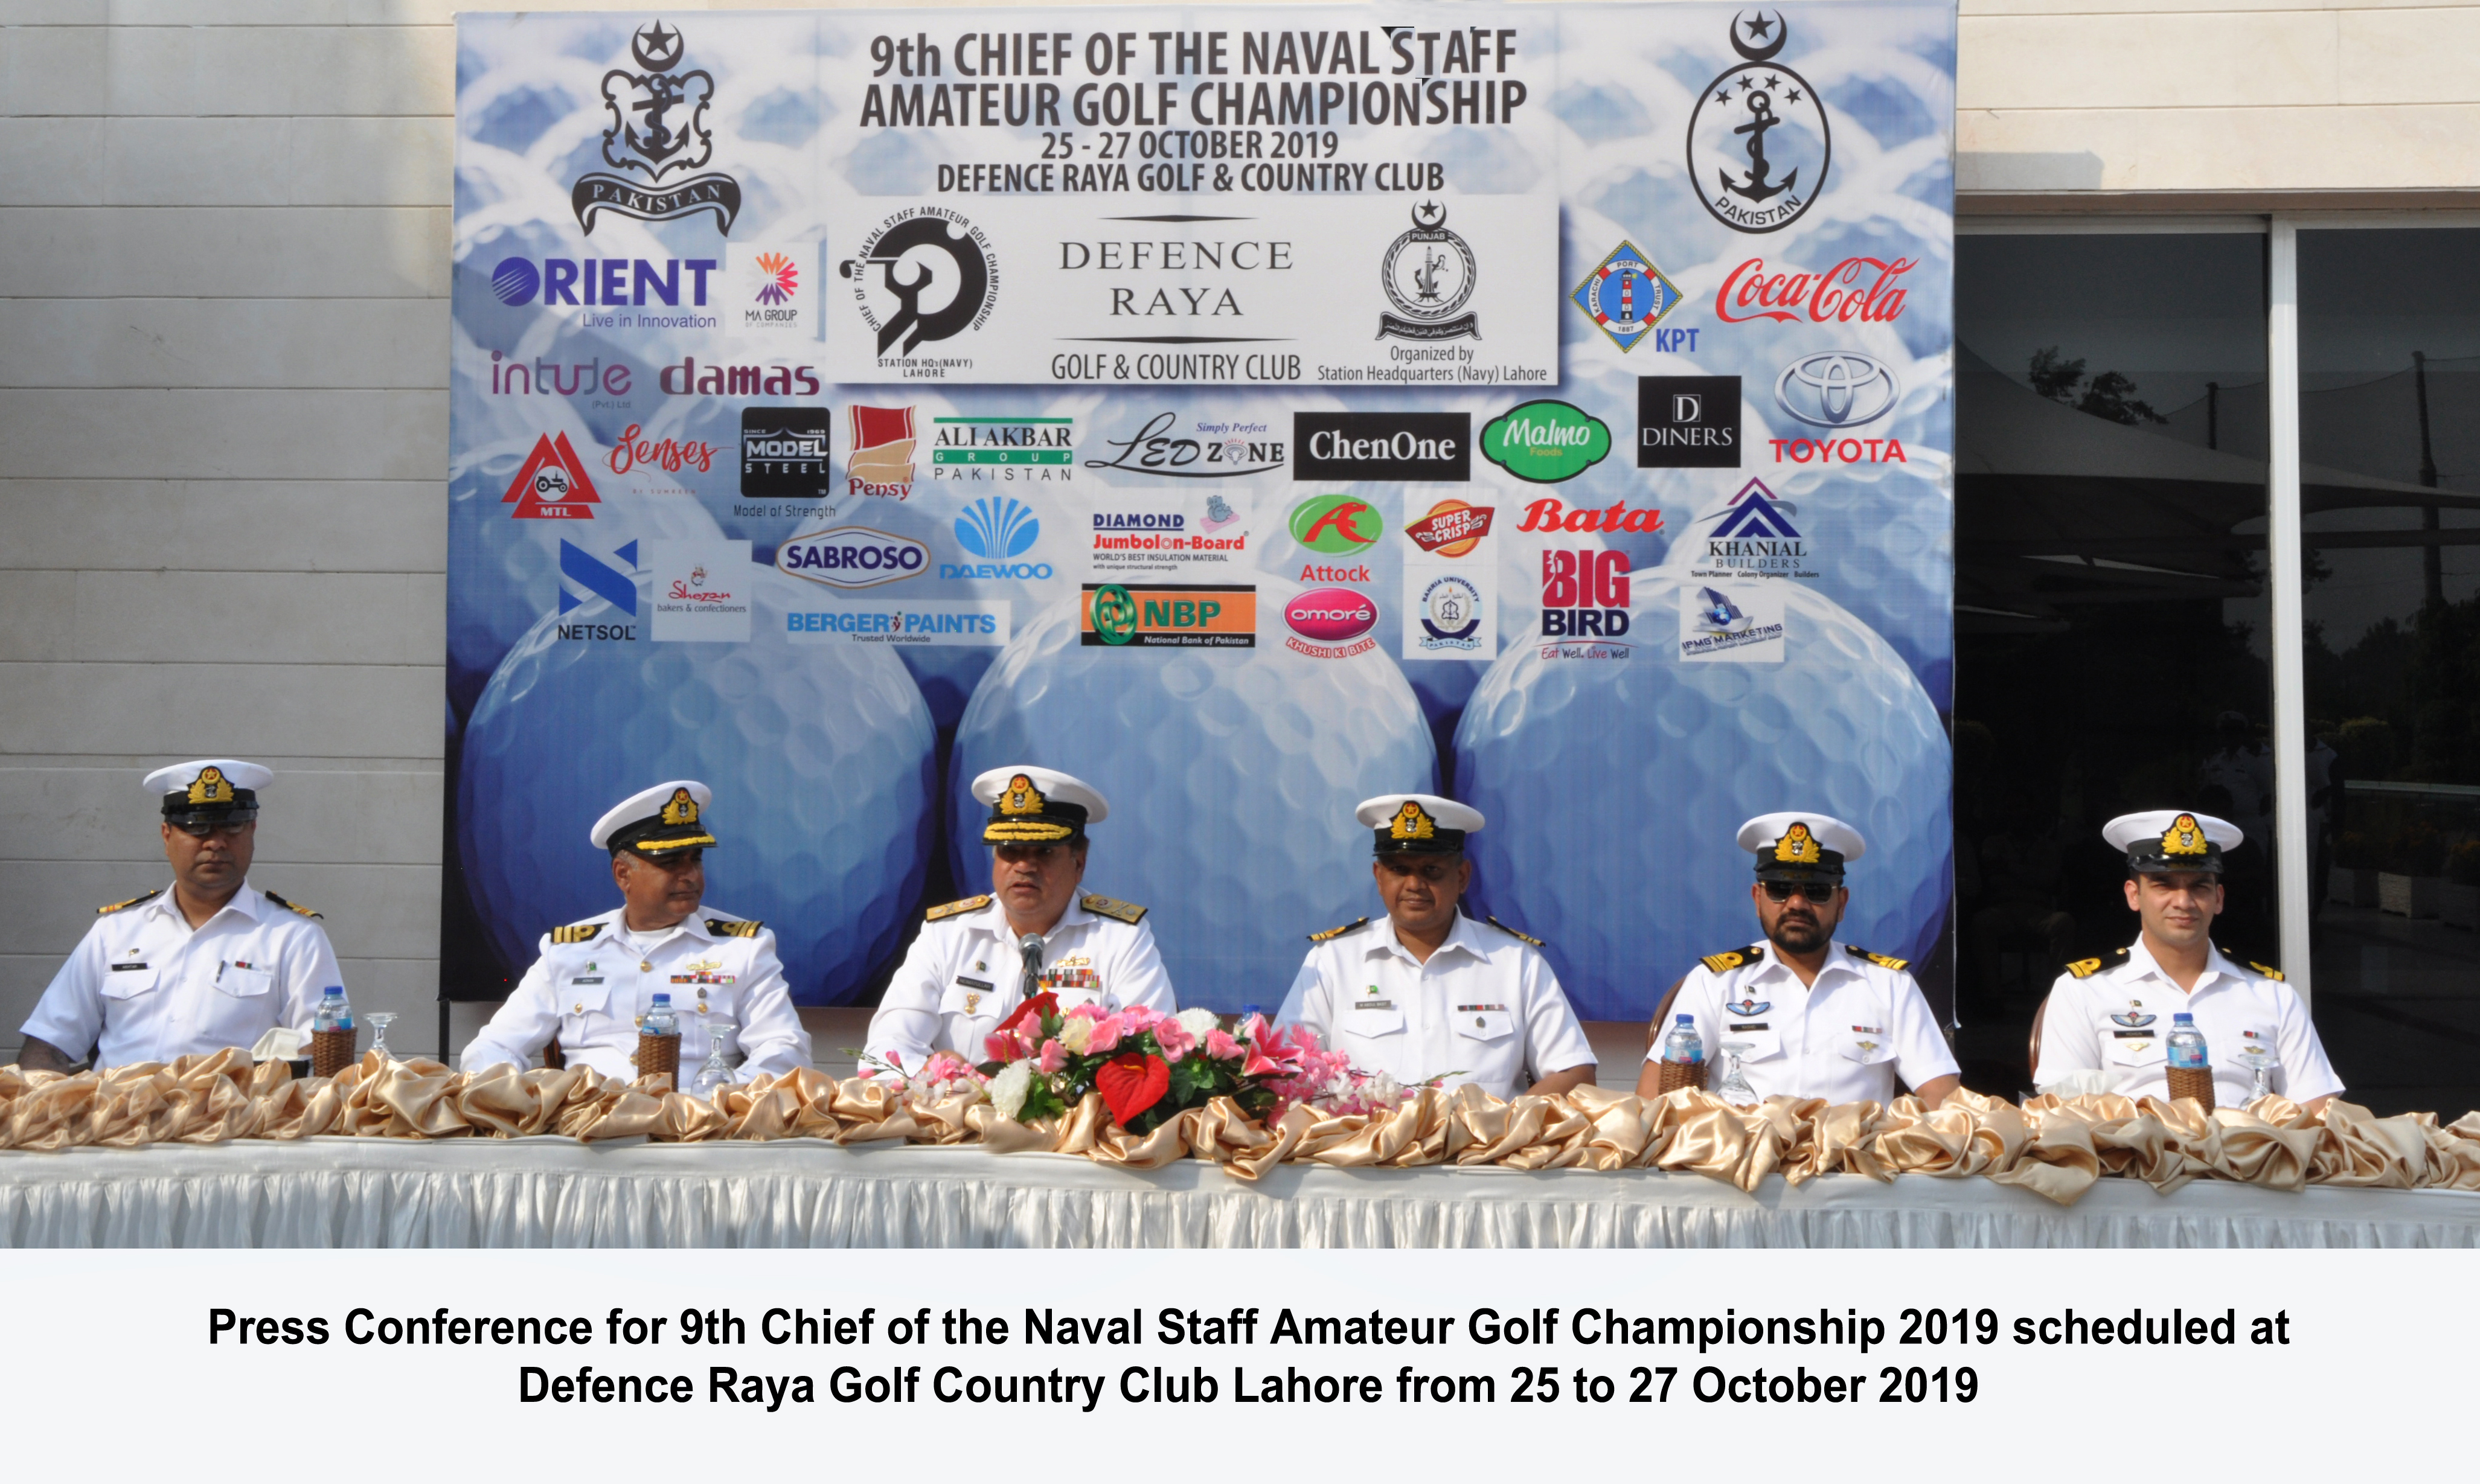 CHIEF OF THE NAVAL STAFF AMATEUR GOLF CHAMPIONSHIP 2019